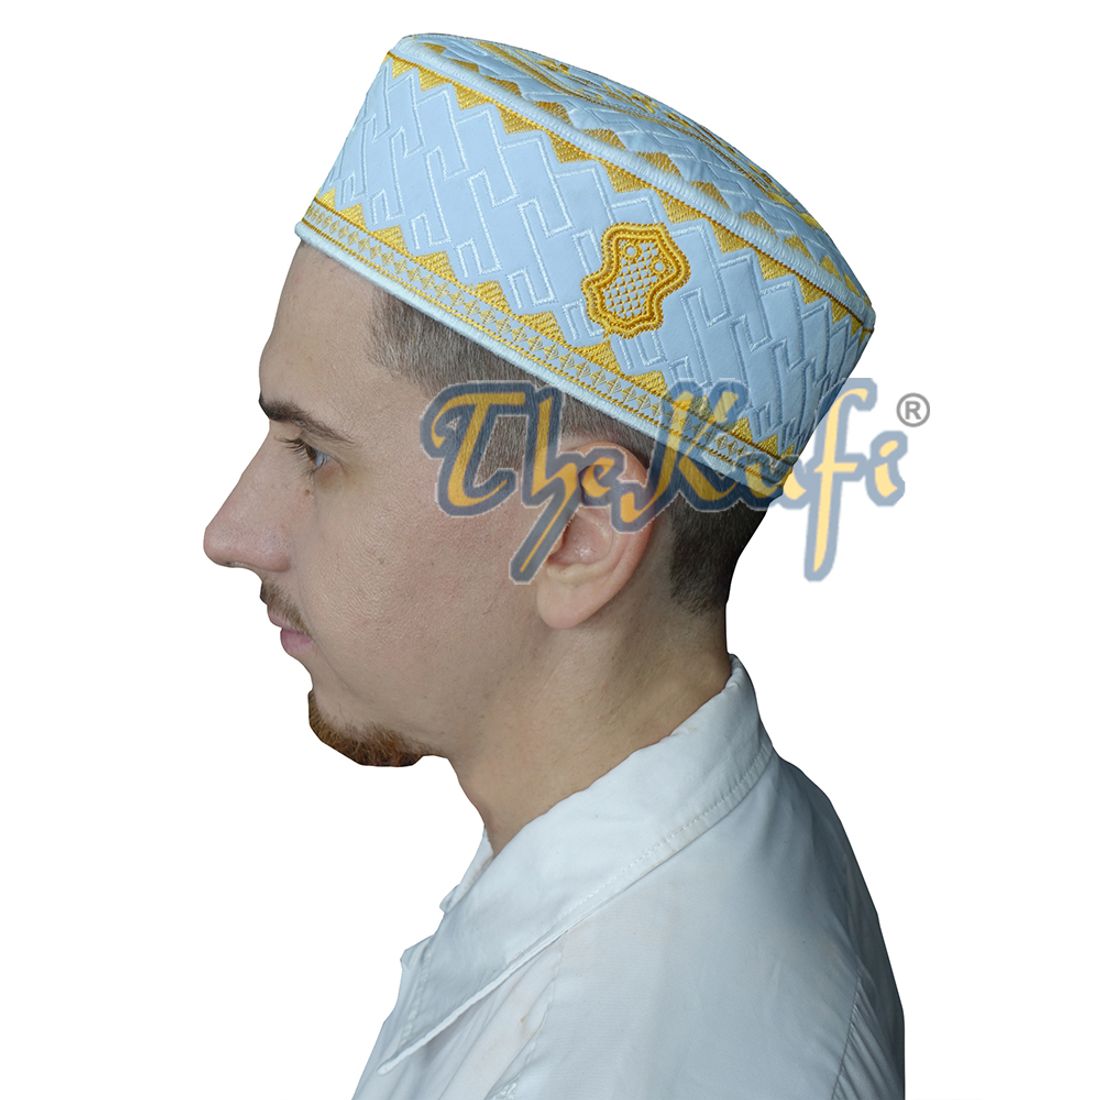 Textured White and Gold Embroidered Sandal Kufi Hat